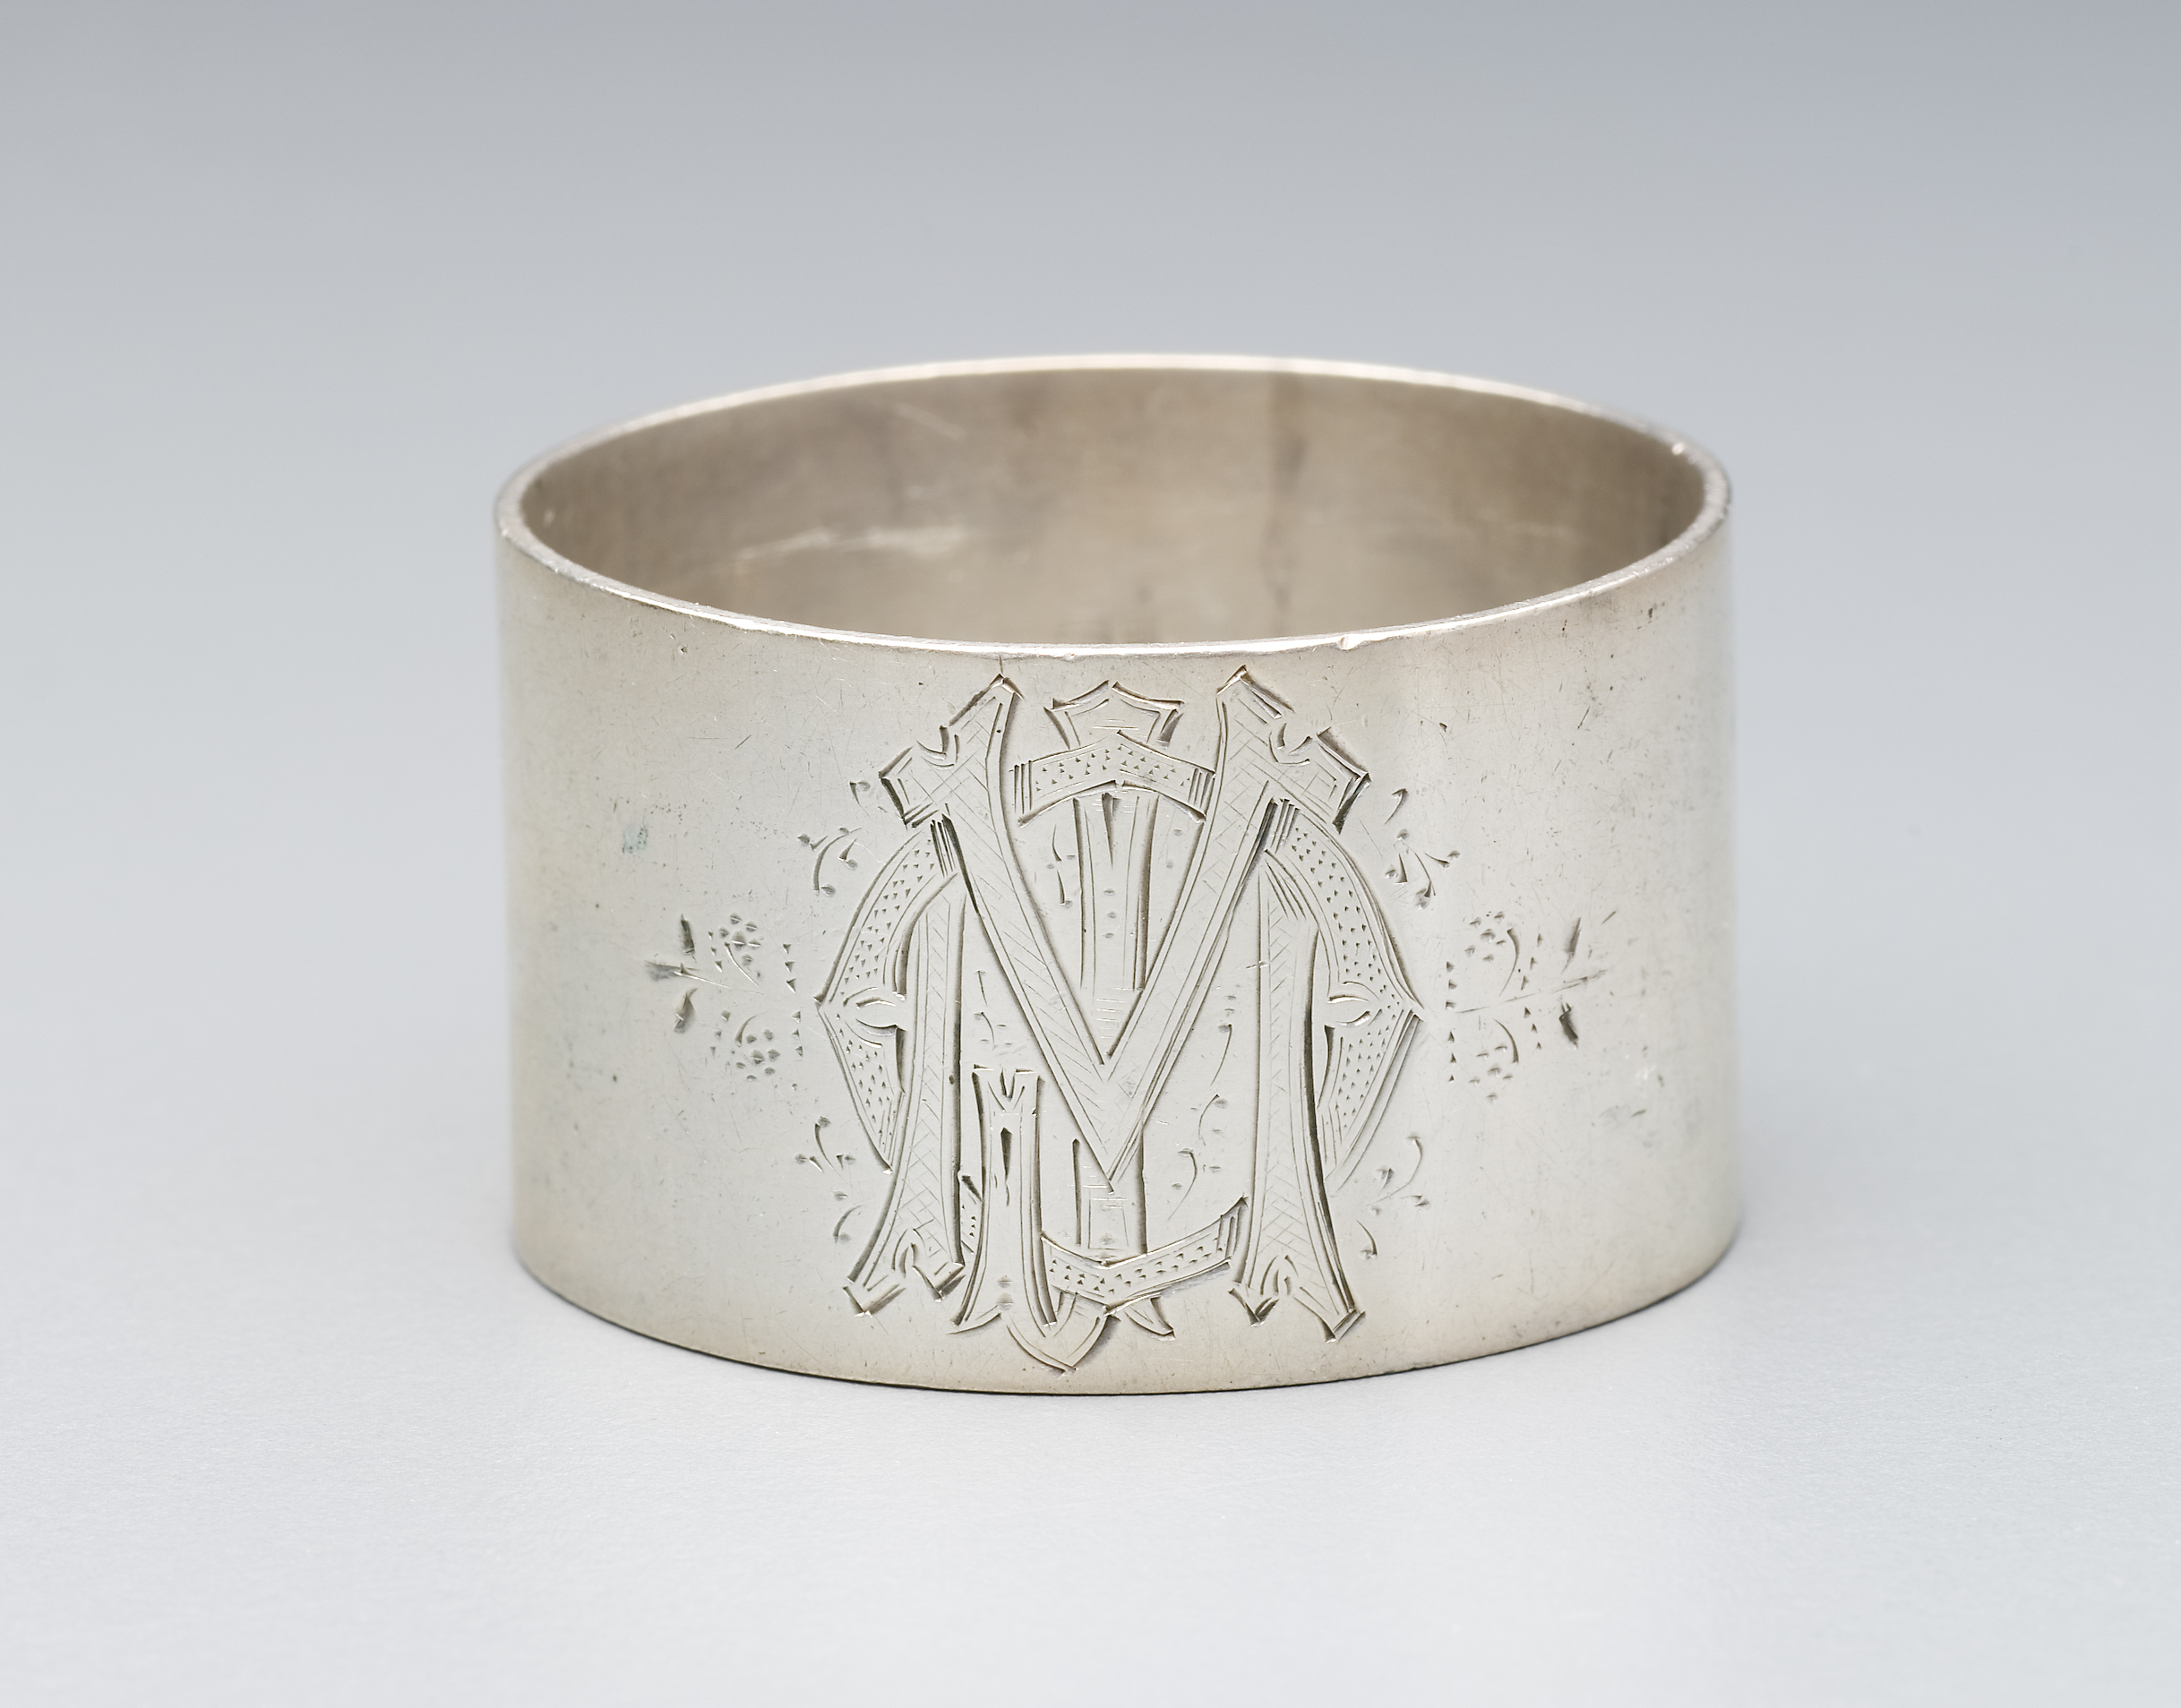 Napkin ring made by George Bradley and Son